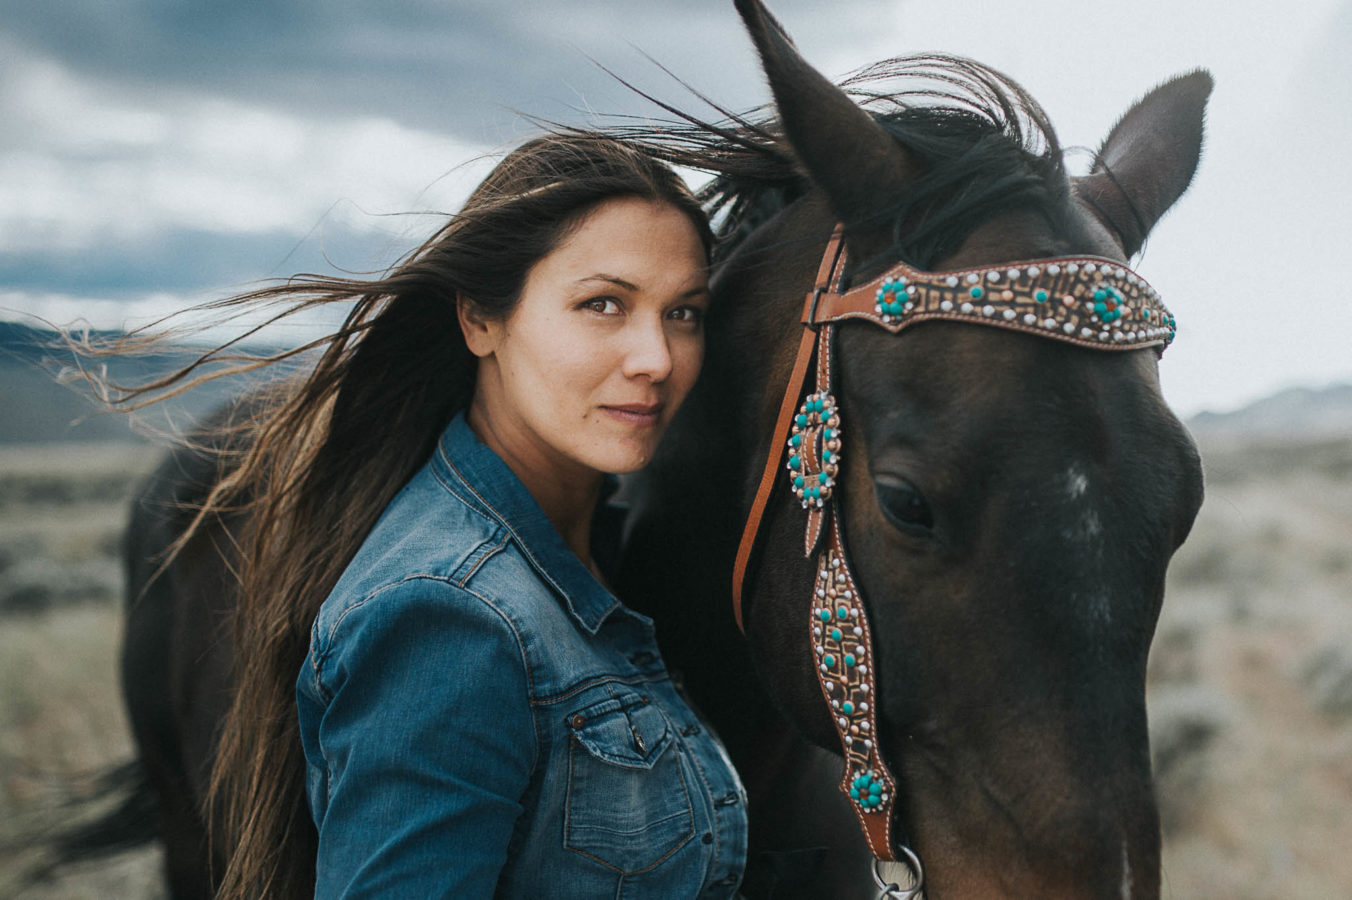 native canadian photographer candice camille stands with her horse and her hair blowing in the wind in this gorgeous image by horse photographer sherry nelsen